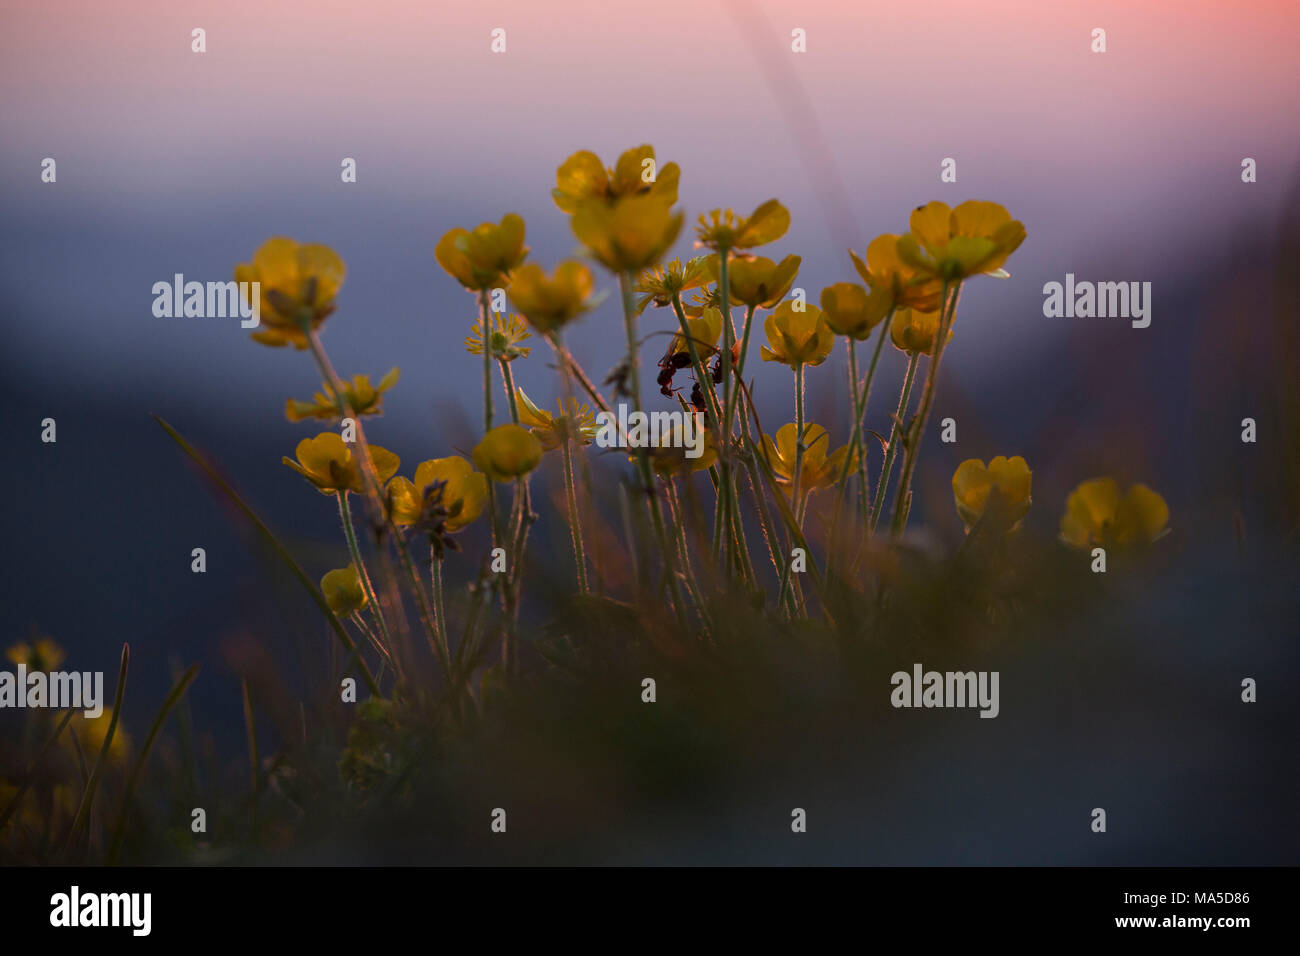 Flowering buttercup in the alps at sunset, close-up, ranunculus Stock Photo